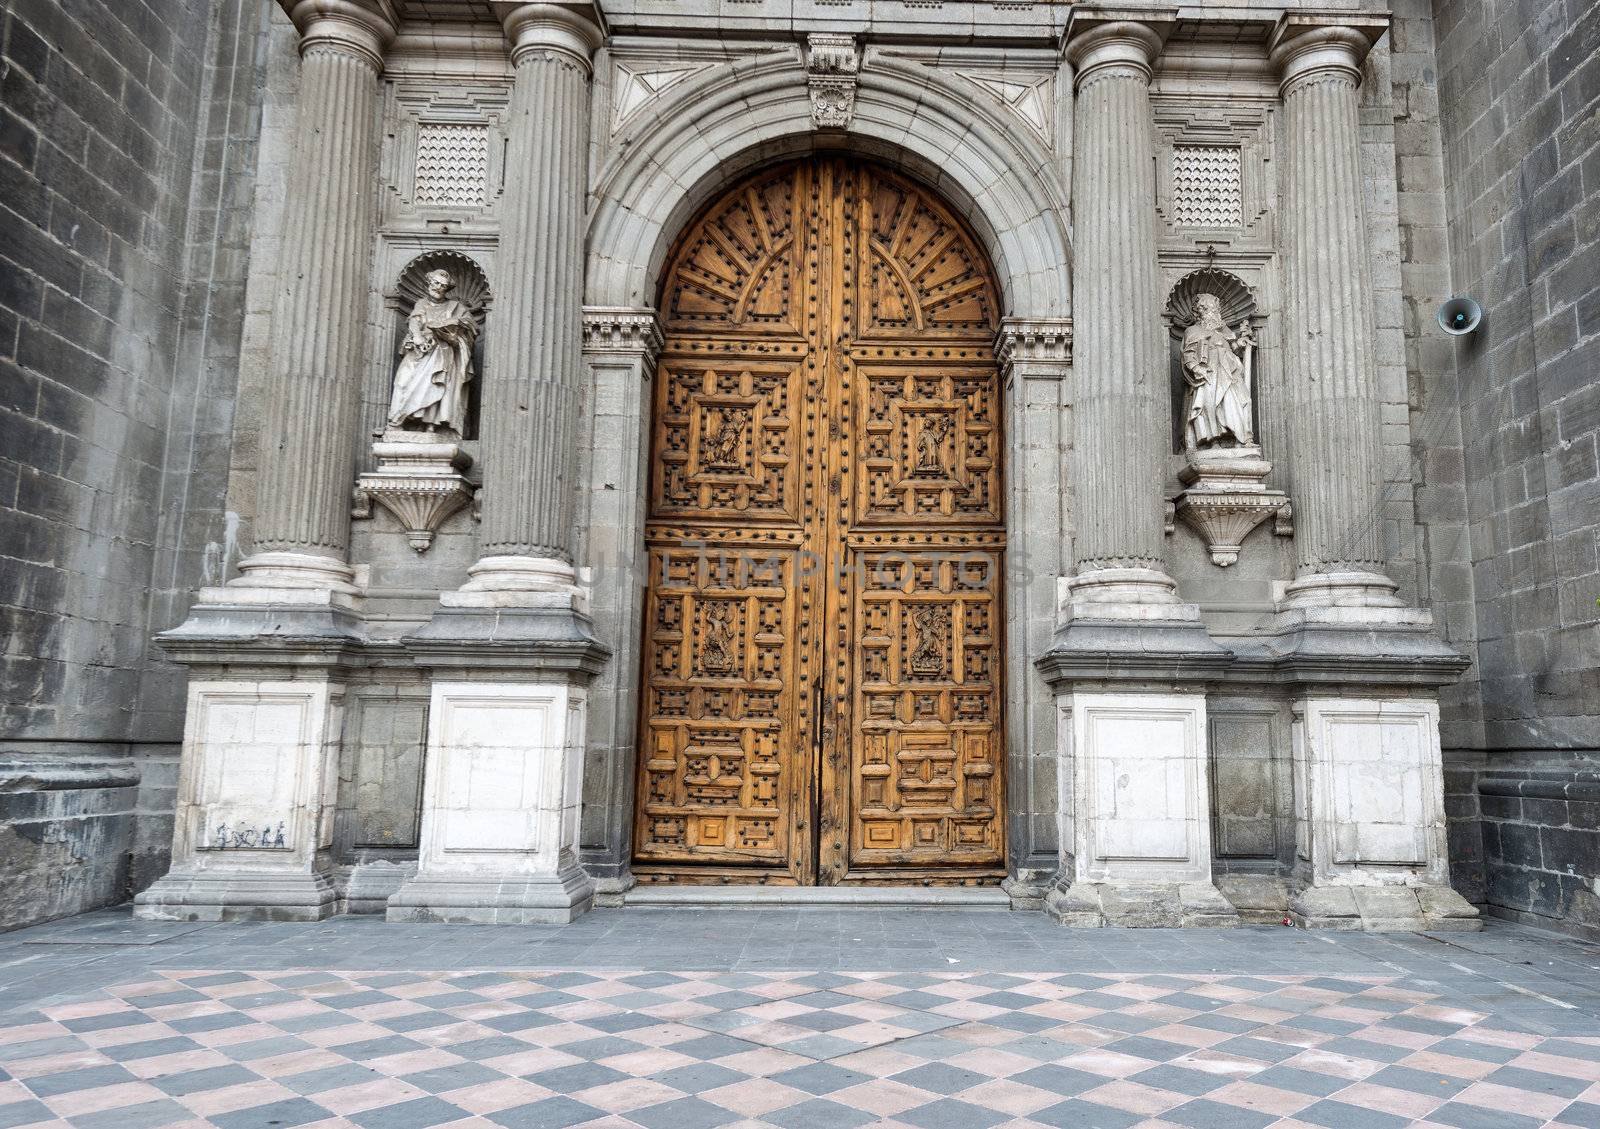 Wooden entrance doors to The Metropolitan Cathedral of the Assumption of Mary of Mexico City. It  is the oldest and largest cathedral in the Americas and seat of the Roman Catholic Archdiocese of Mexico. It is situated atop the former Aztec sacred precinct near the Templo Mayor on the northern side of the Plaza de la Constitución in downtown Mexico City. The cathedral was built in sections from 1573 to 1813 around the original church that was constructed soon after the Spanish conquest of Tenochtitlán, eventually replacing it entirely. Spanish architect Claudio de Arciniega planned the construction, drawing inspiration from Gothic cathedrals in Spain.